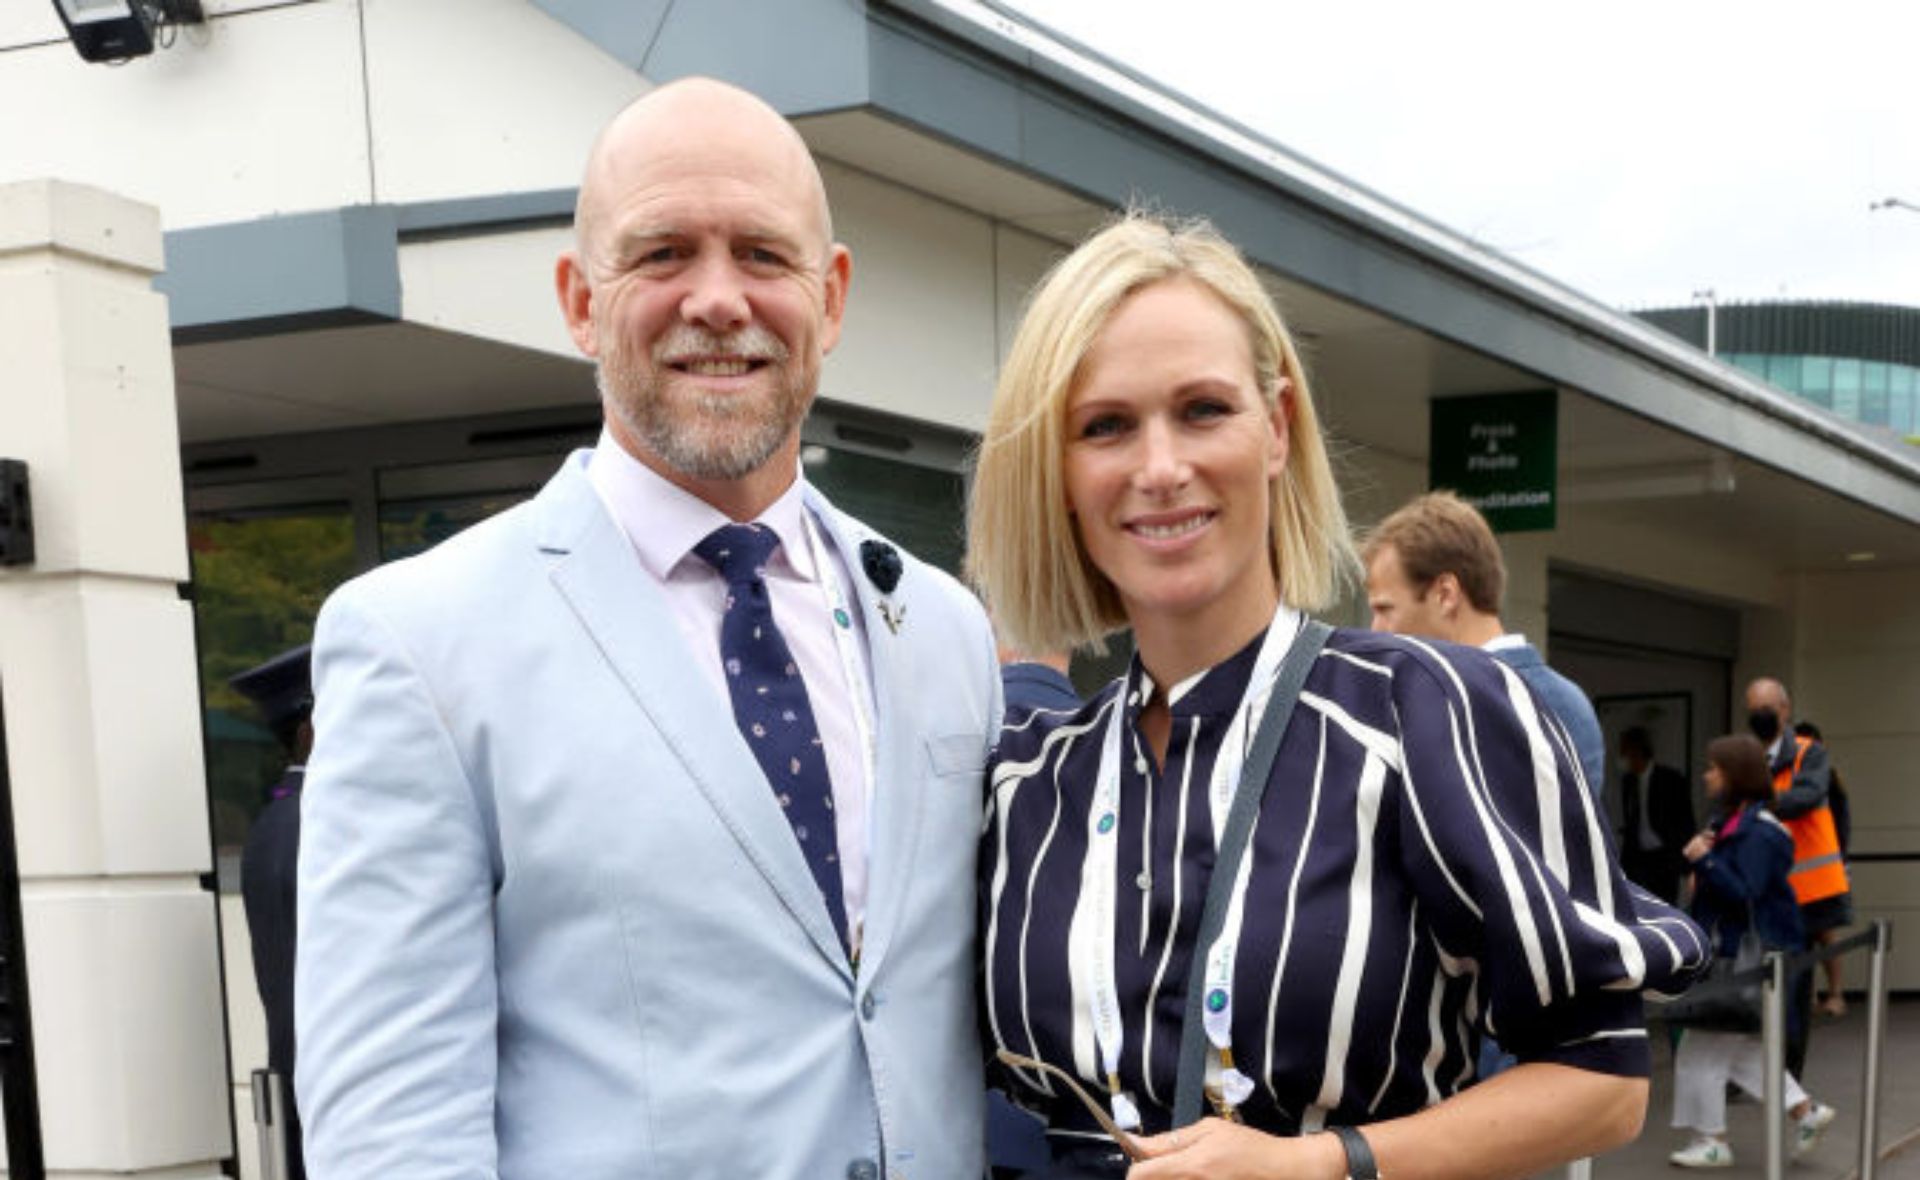 Is a trip to Australia on the cards for Zara Tindall?